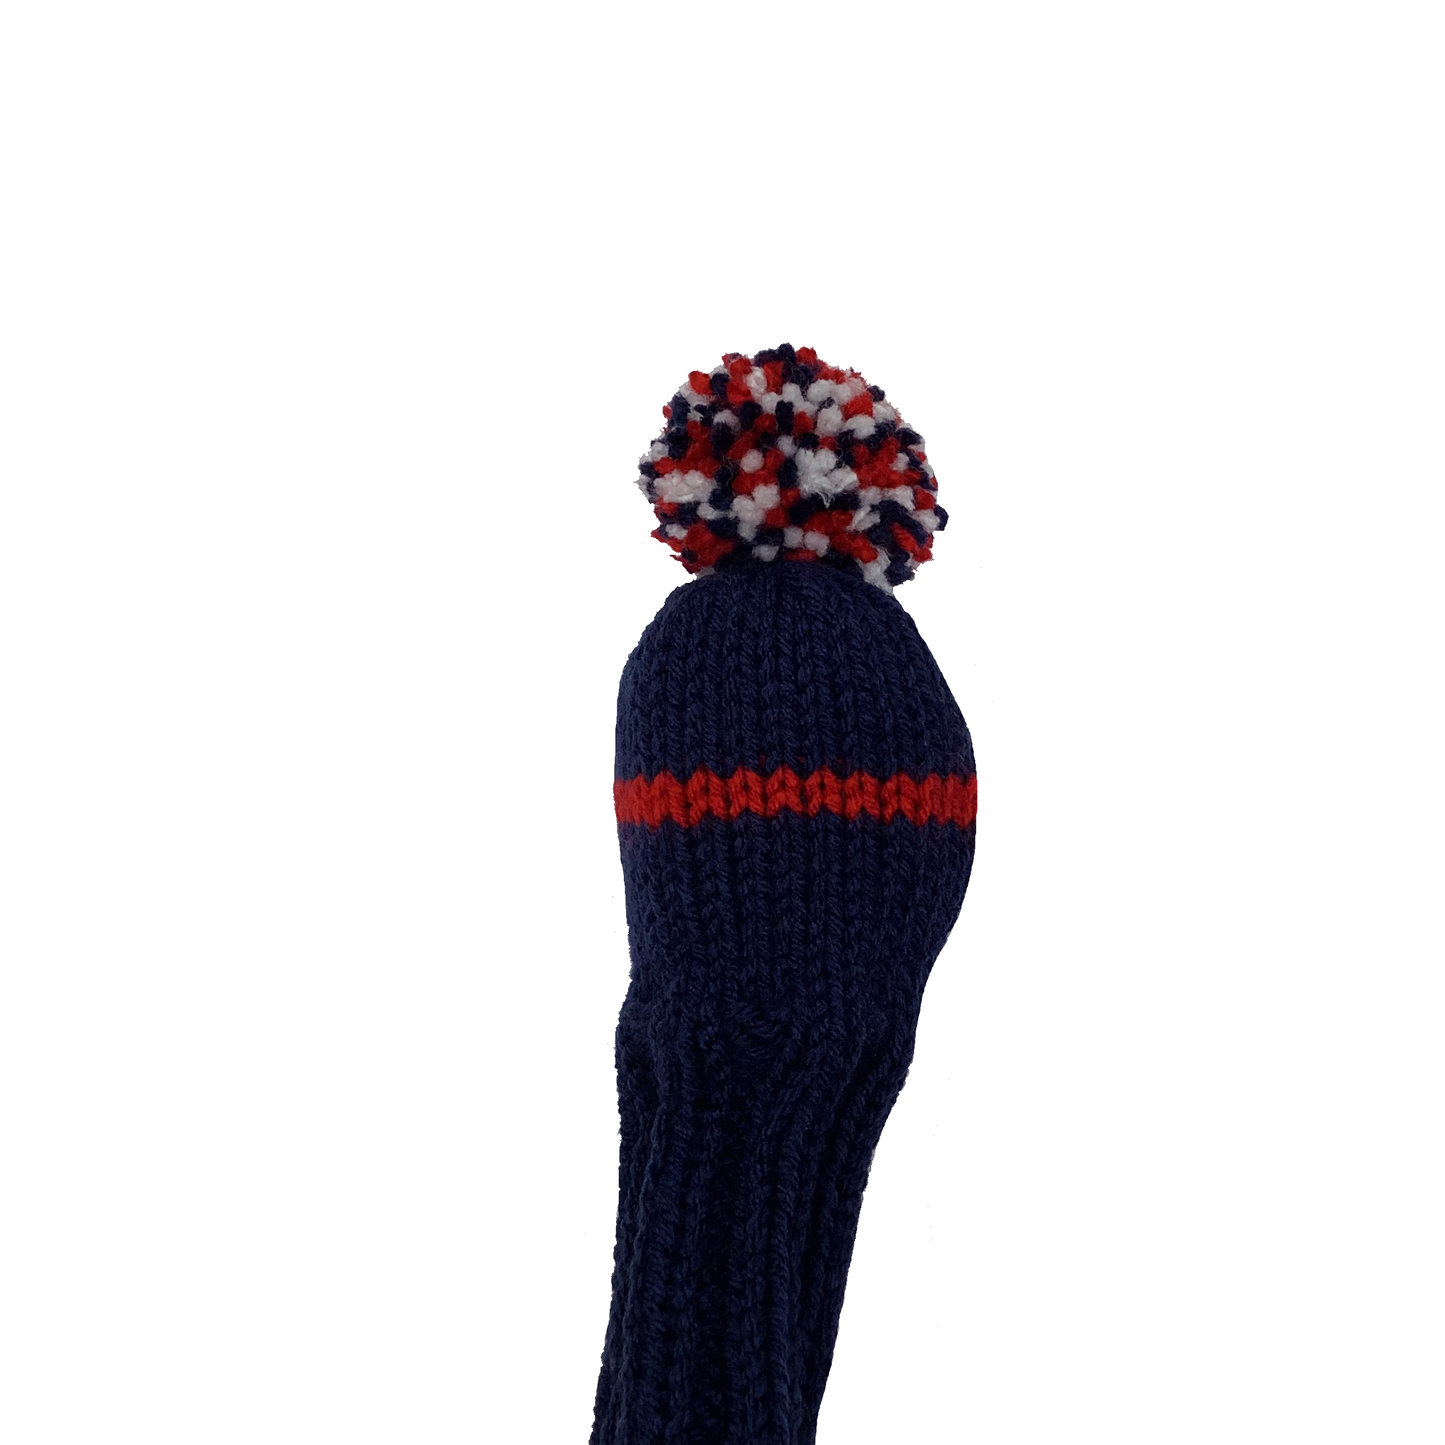 Navy, Red and White - Hybrid #1 Headcover